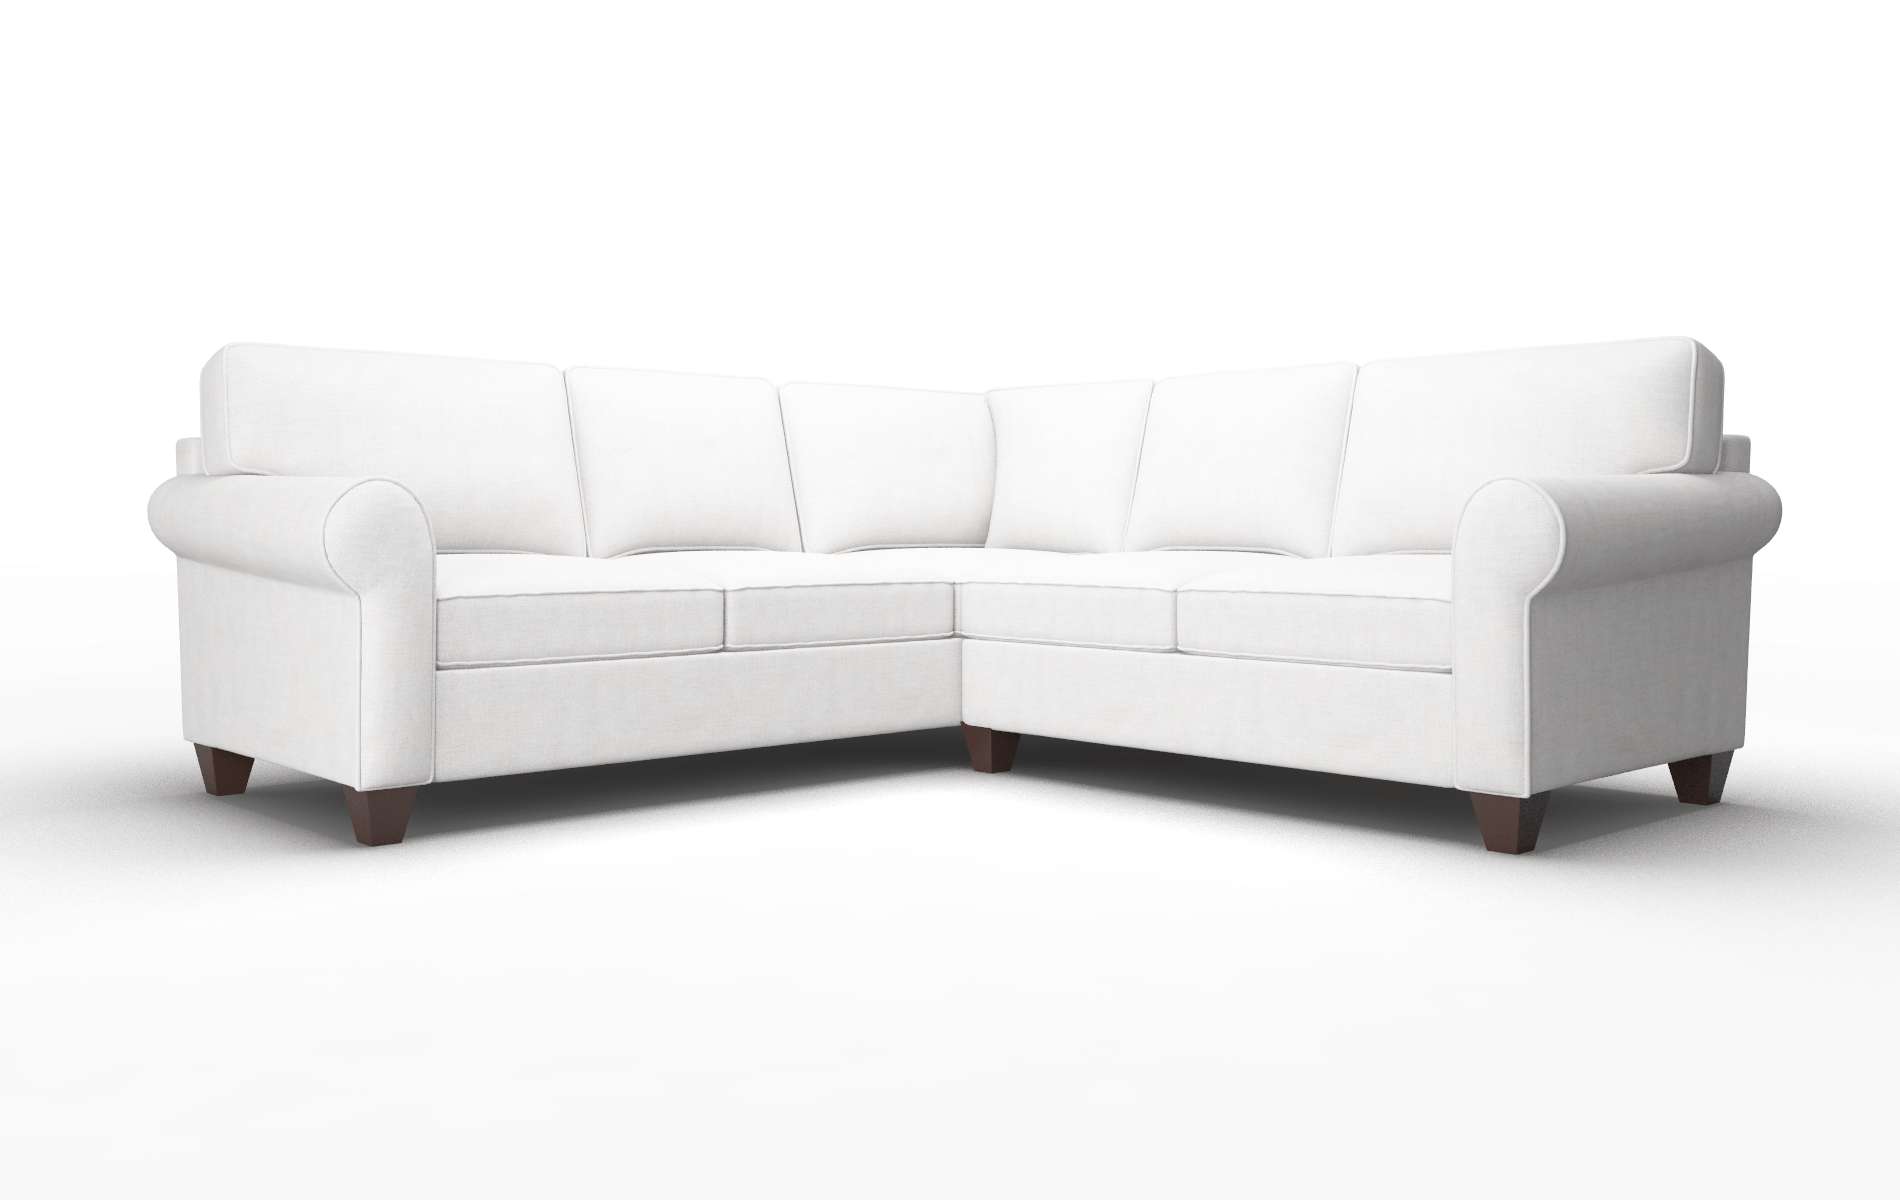 Augusta Catalina Ivory Sectional espresso legs 1